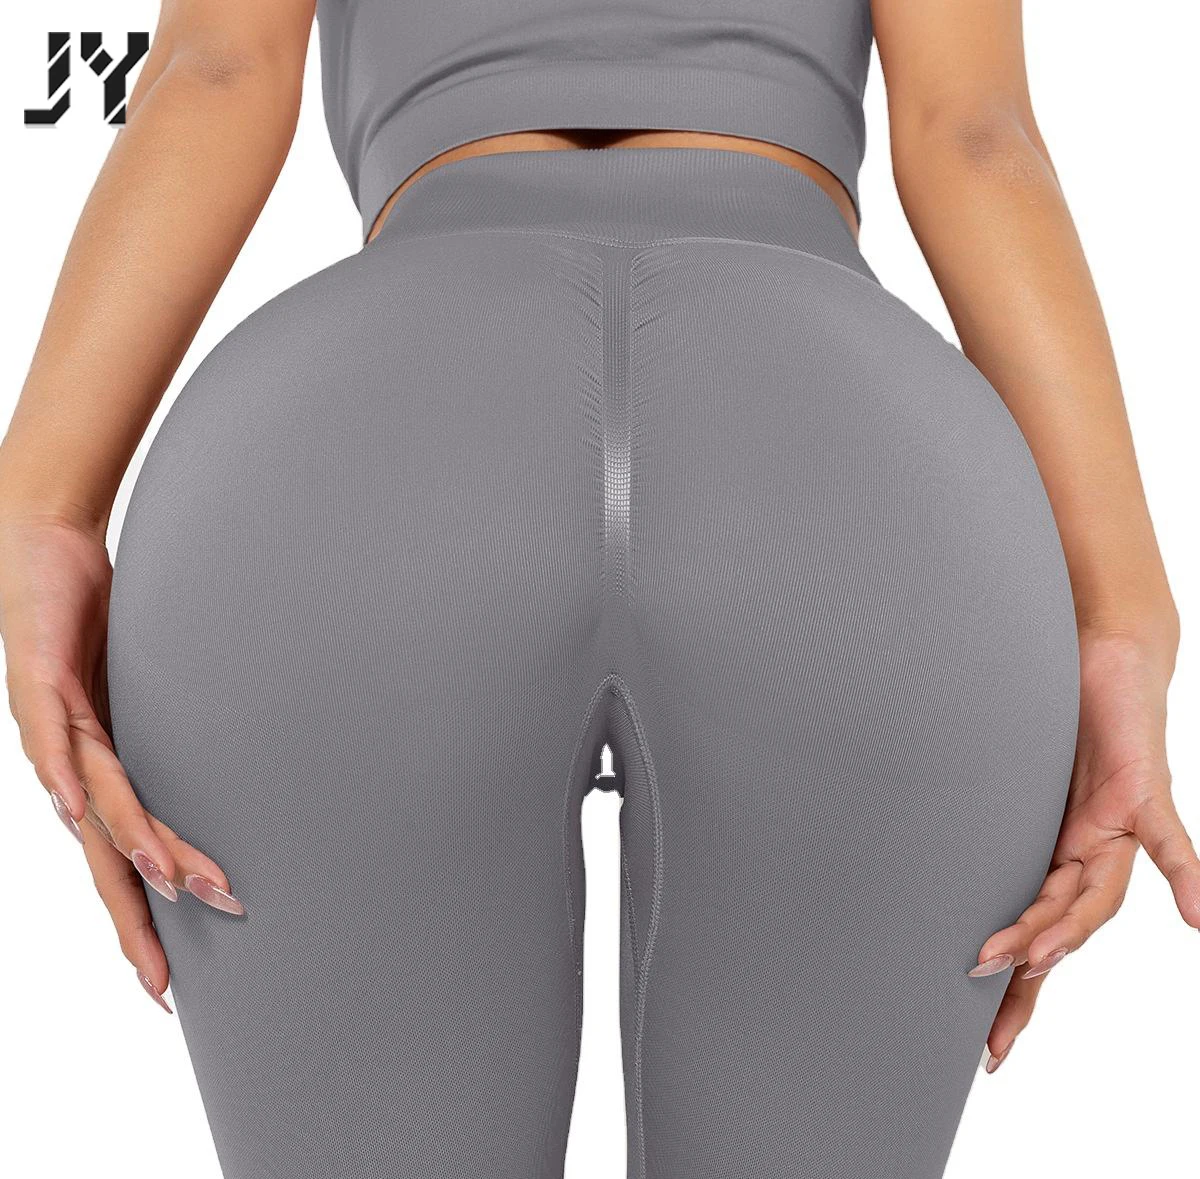 Supply Joyyoung ins new solid color yoga pants seamless fitness